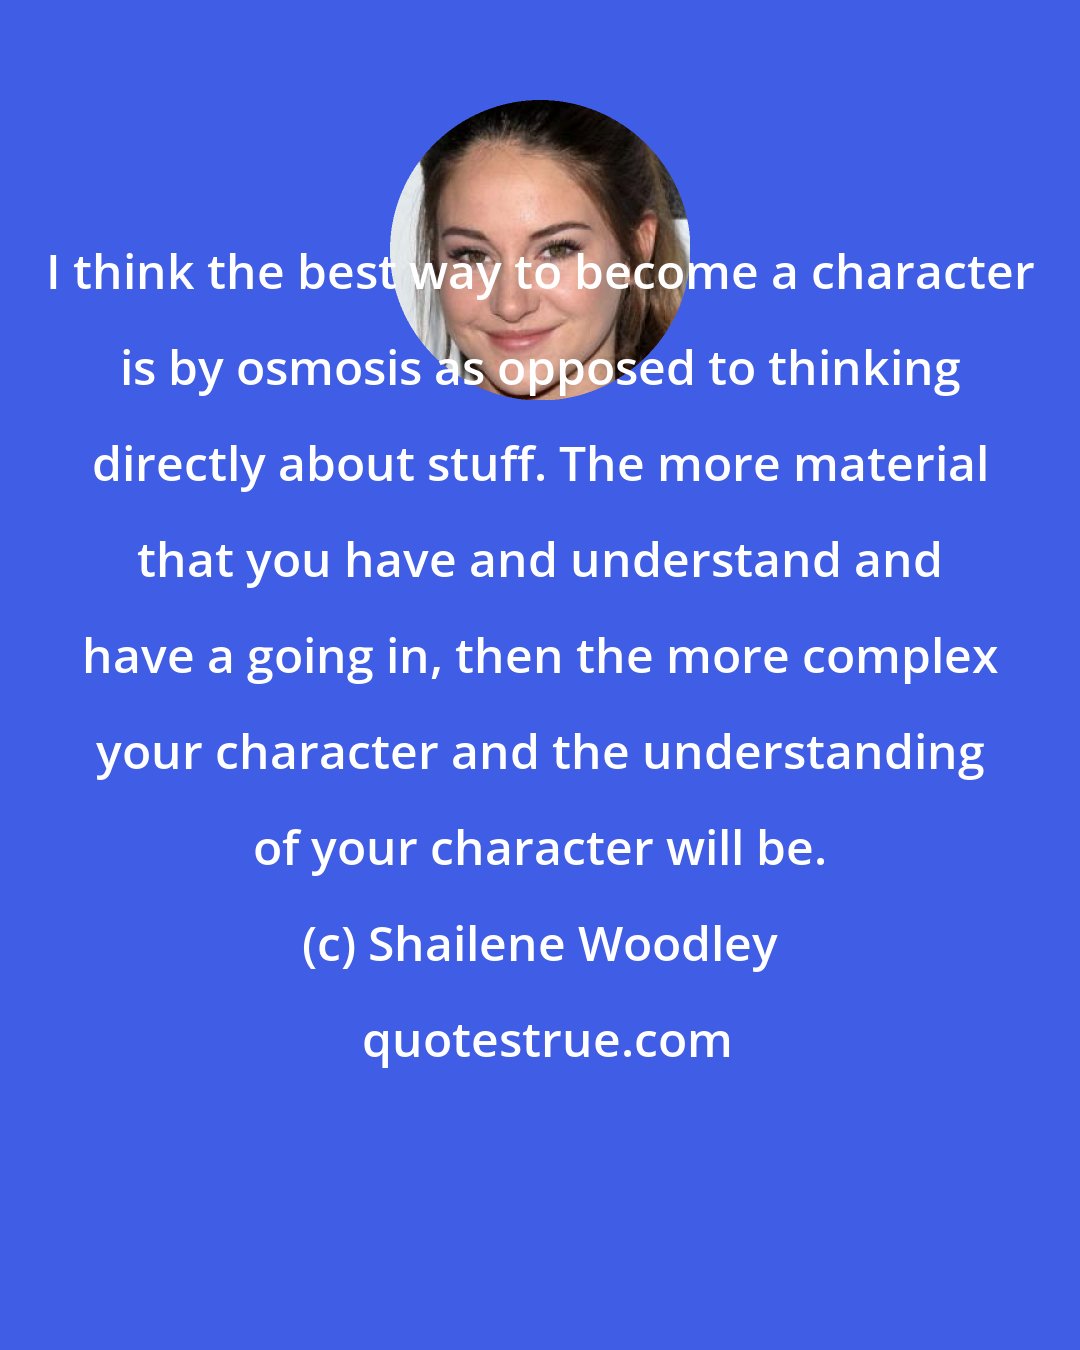 Shailene Woodley: I think the best way to become a character is by osmosis as opposed to thinking directly about stuff. The more material that you have and understand and have a going in, then the more complex your character and the understanding of your character will be.